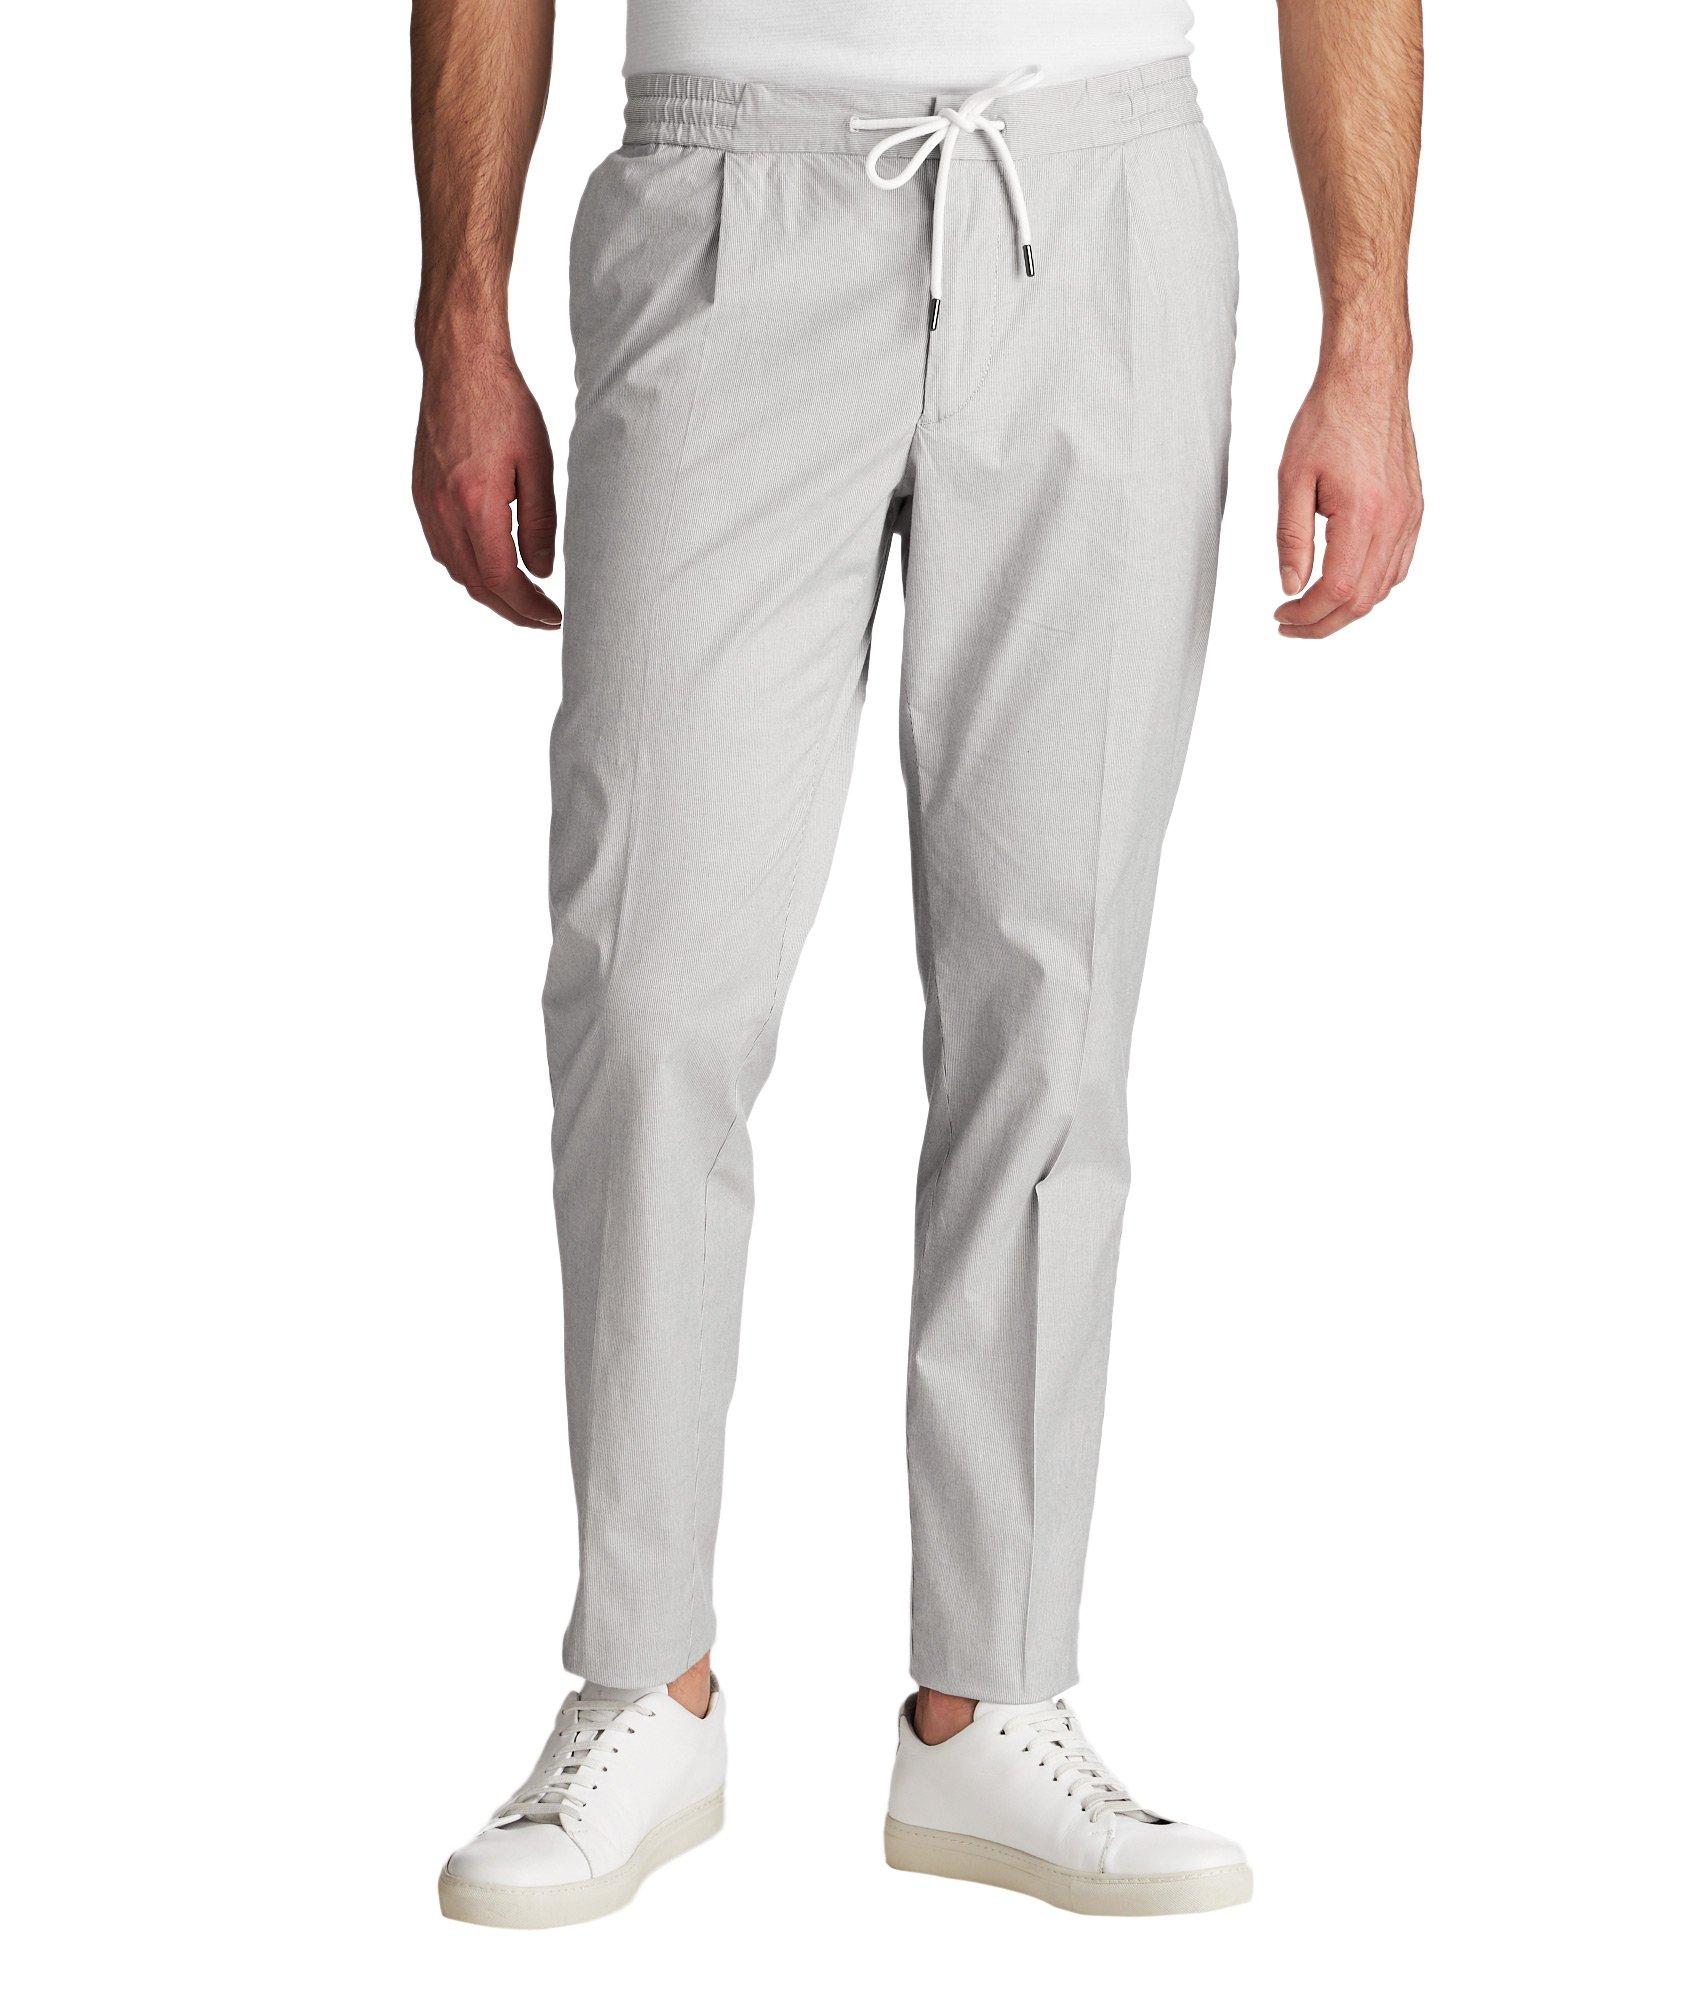 Drawstring Stretch-Cotton Trousers image 0